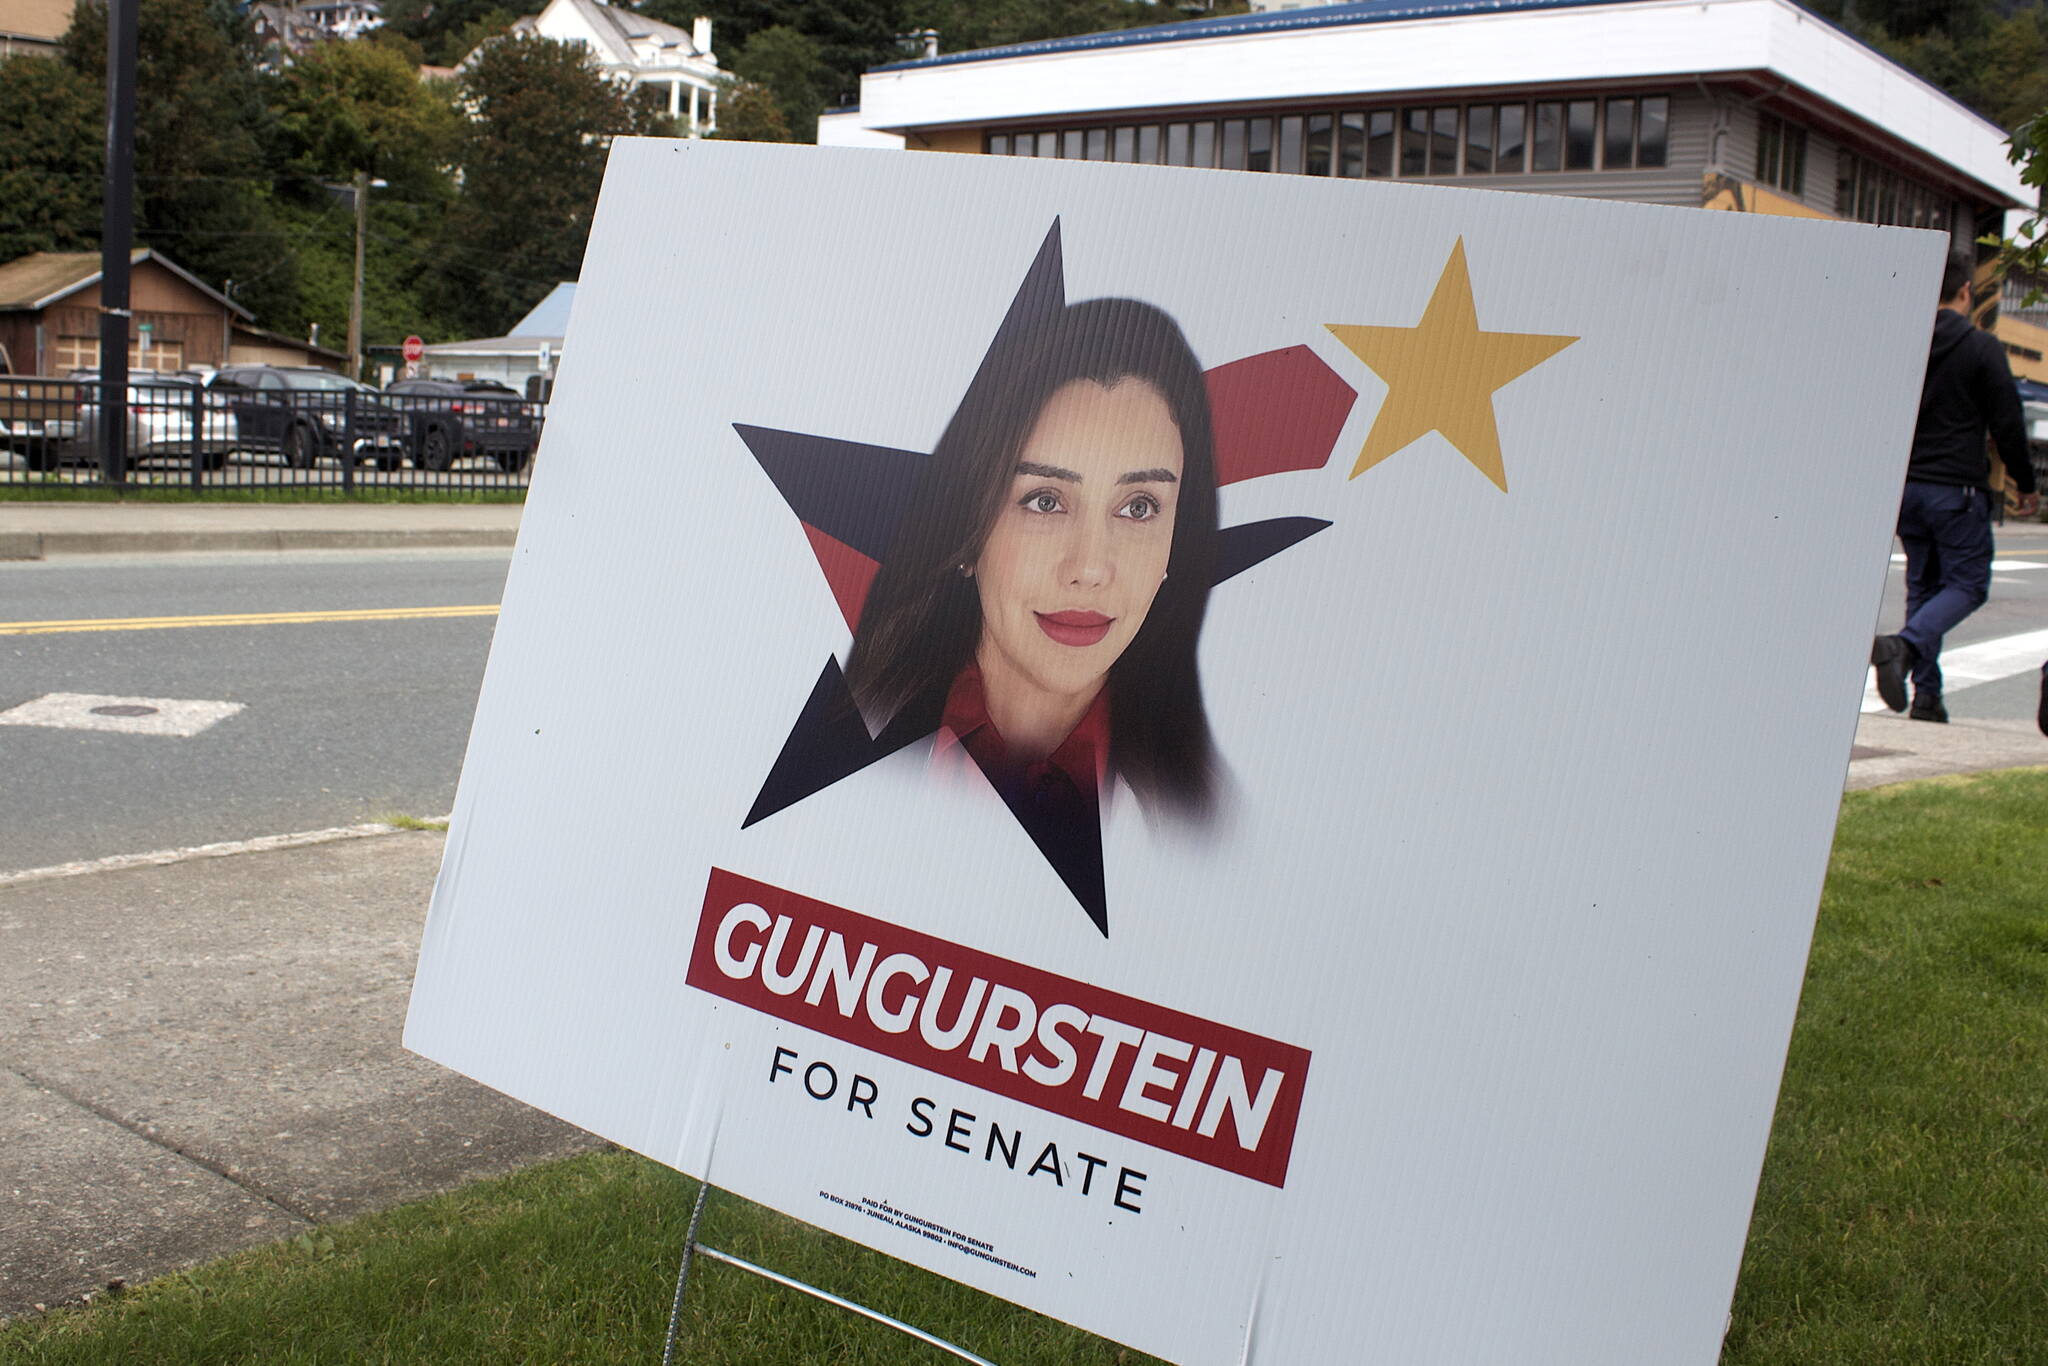 U.S. Senate candidate Shoshana Gungurstein stars in a campaign sign within view of the Alaska governor’s mansion. Gungurstein, an independent, got exposure this week for being a Hollywood actress under a different name after questions about her past went unanswered throughout the campaign. She is one of 19 candidates seeking to be among the four selected in next Tuesday’s primary to compete in the November general election. (Mark Sabbatini / Juneau Empire)